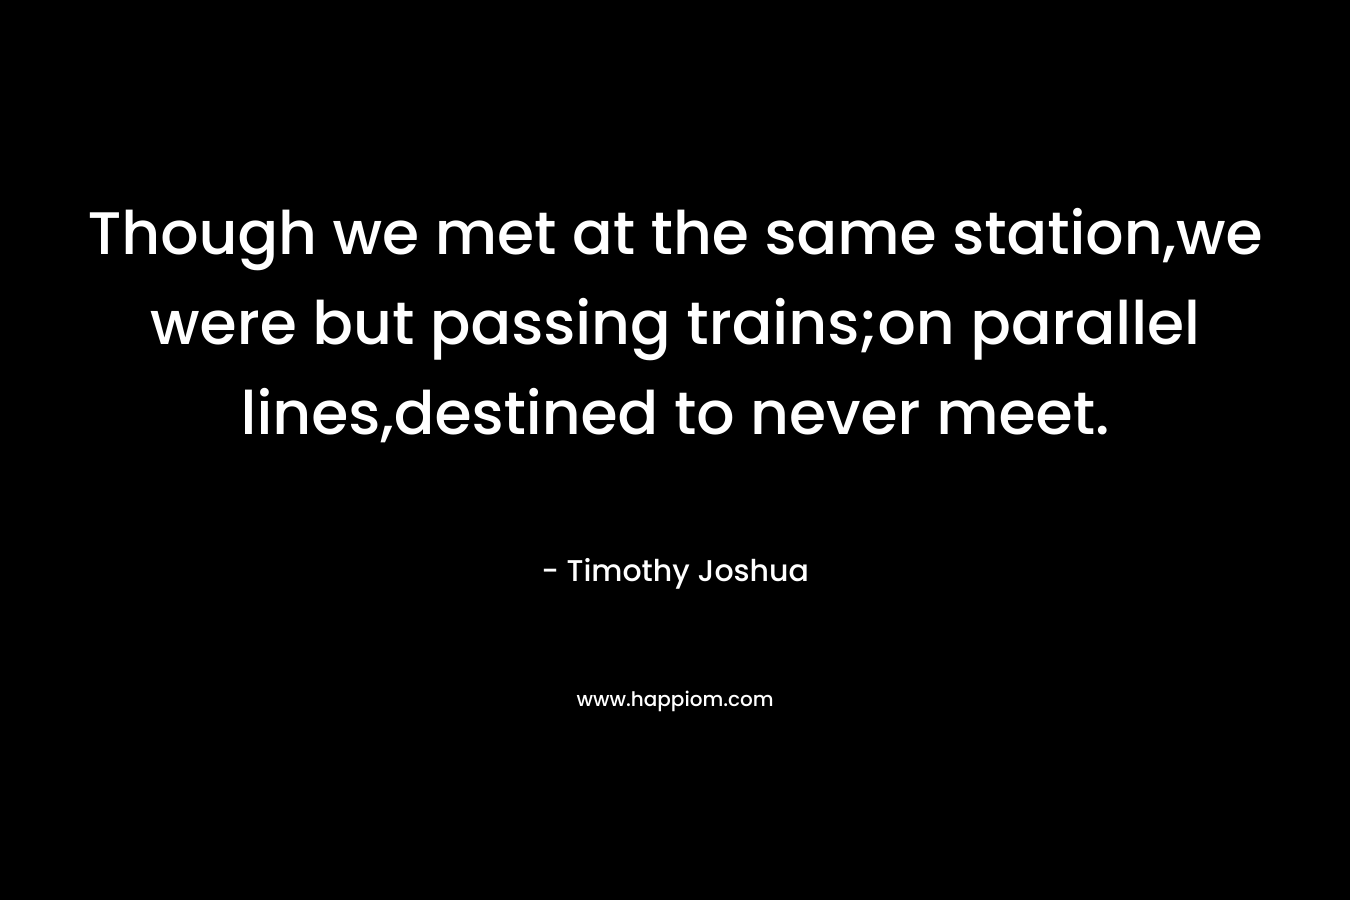 Though we met at the same station,we were but passing trains;on parallel lines,destined to never meet.